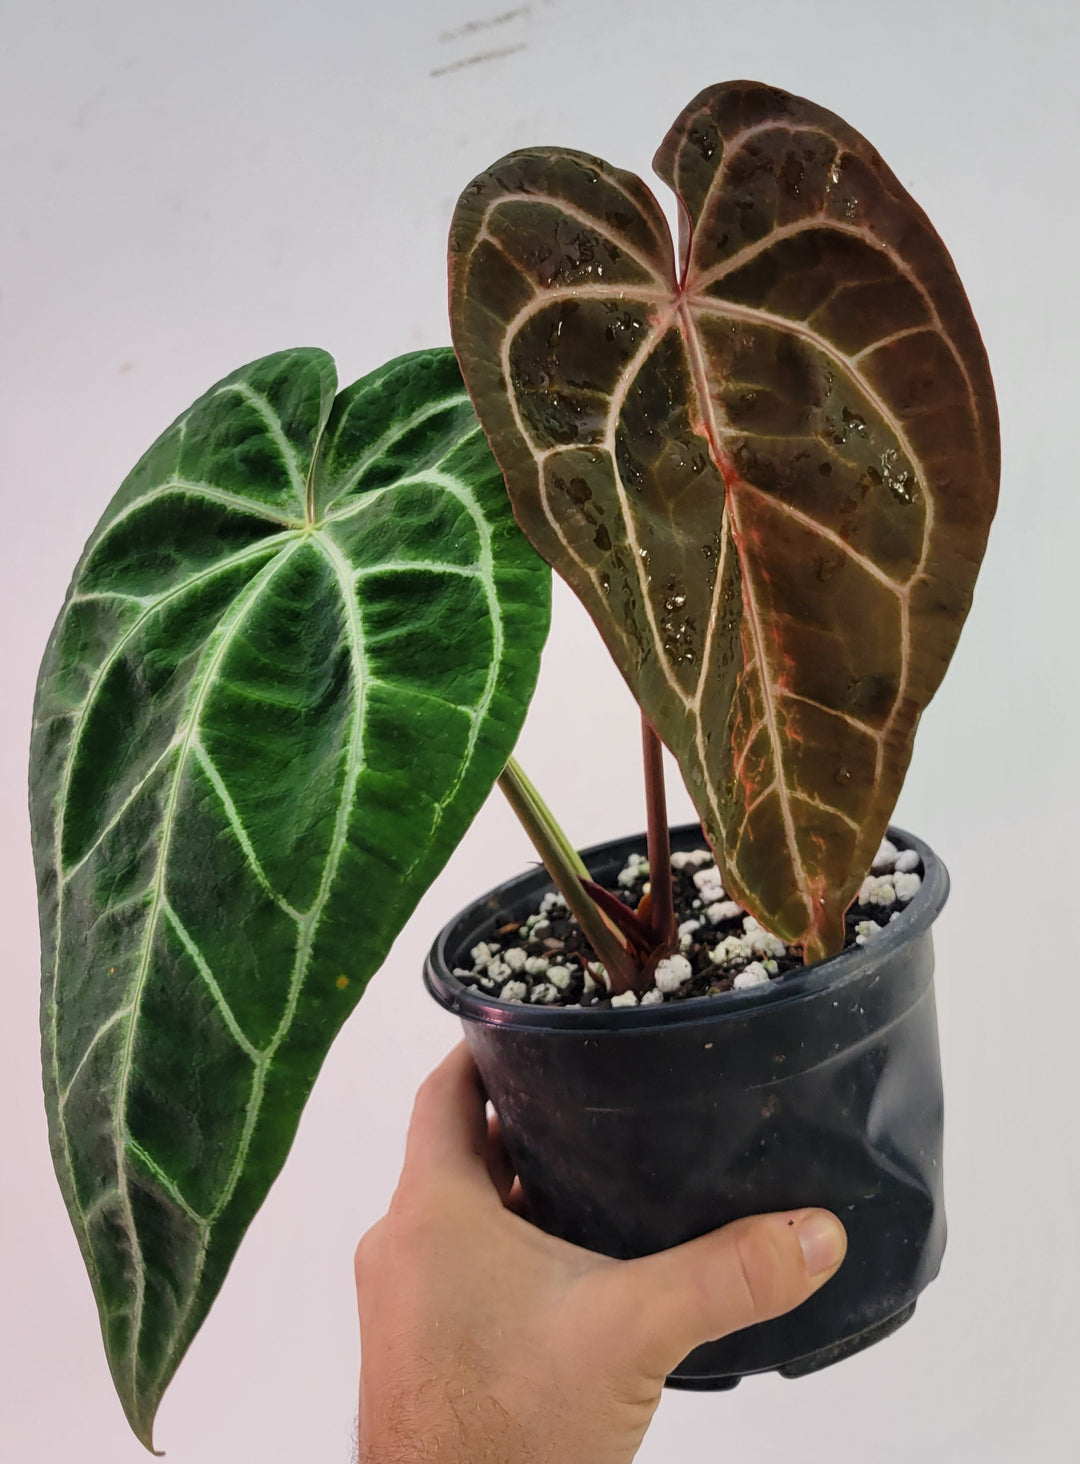 Anthurium Doc Block F2 x Hoffmannii Select Narrow 6in-  #G43 - Nice Plants Good Pots